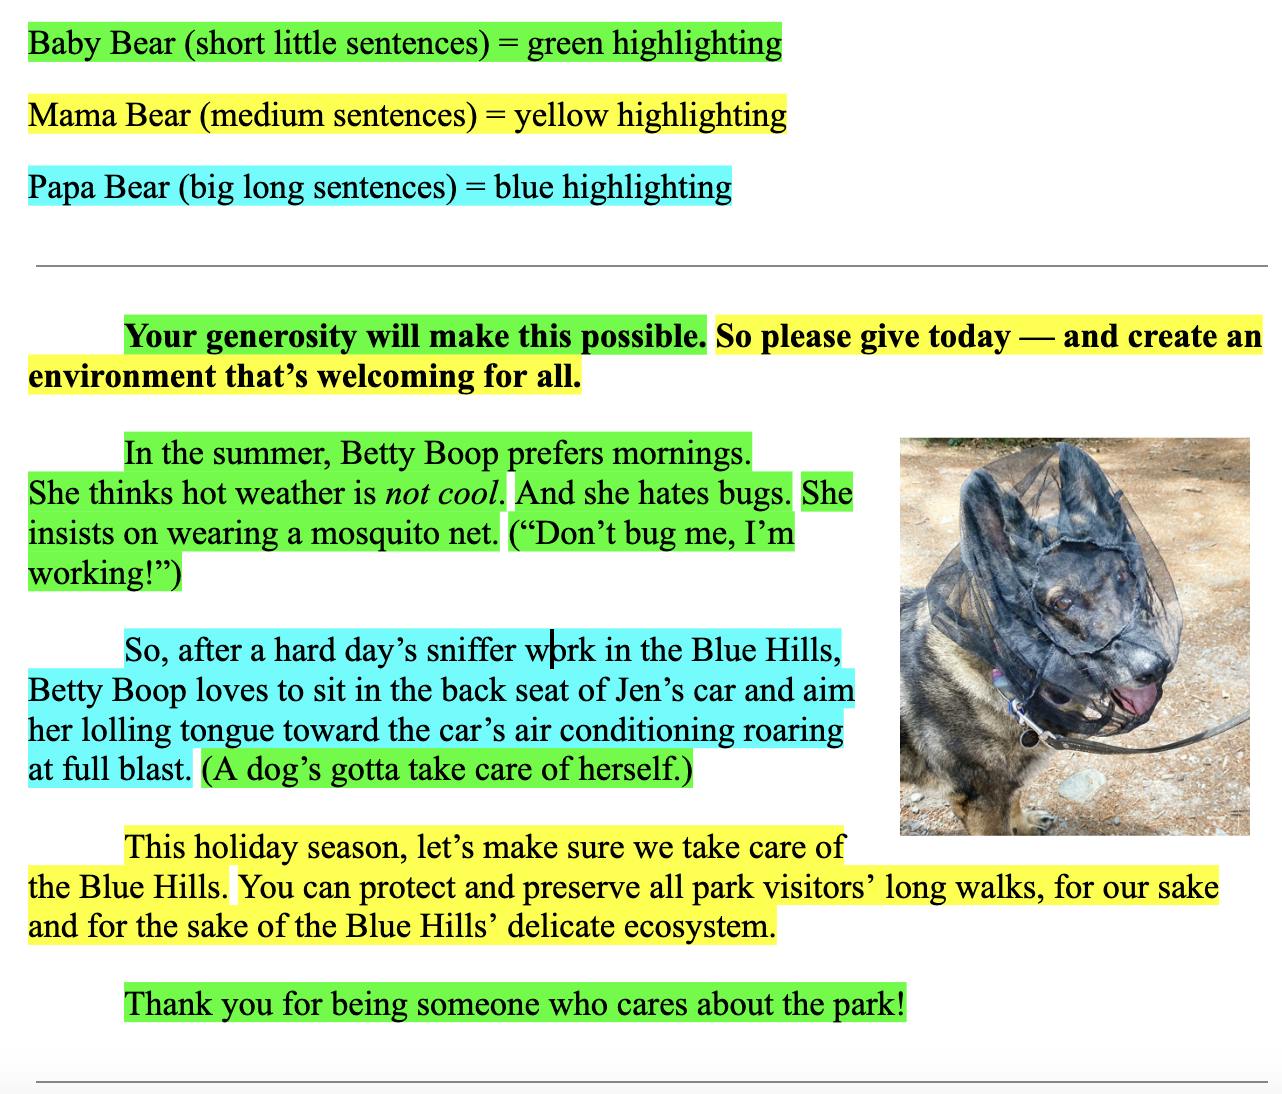 Baby Bear (short little sentences) = green highlighting Mama Bear (medium sentences) = yellow highlighting Papa Bear (big long sentences) = blue highlighting  Your generosity will make this possible. So please give today — and create an environment that’s welcoming for all. In the summer, Betty Boop prefers mornings.  She thinks hot weather is not cool. And she hates bugs. She insists on wearing a mosquito net. (“Don’t bug me, I’m working!”) So, after a hard day’s sniffer work in the Blue Hills, Betty Boop loves to sit in the back seat of Jen’s car and aim her lolling tongue toward the car’s air conditioning roaring at full blast. (A dog’s gotta take care of herself.) This holiday season, let’s make sure we take care of the Blue Hills. You can protect and preserve all park visitors’ long walks, for our sake and for the sake of the Blue Hills’ delicate ecosystem.  Thank you for being someone who cares about the park!